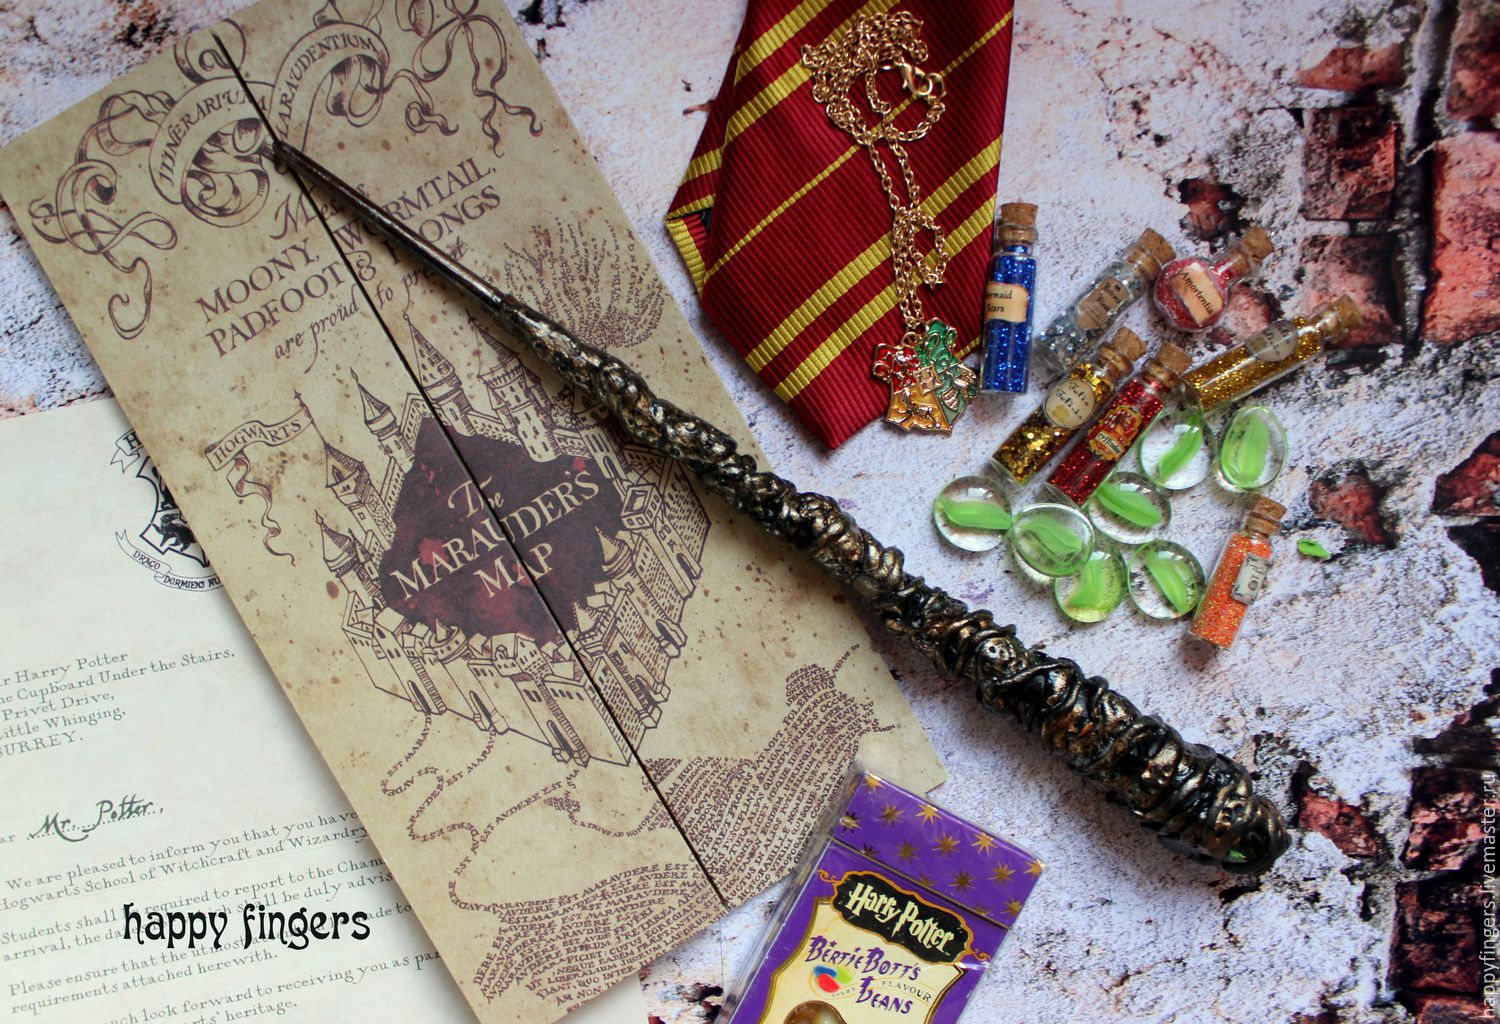 Symbolism In The Wand's Design